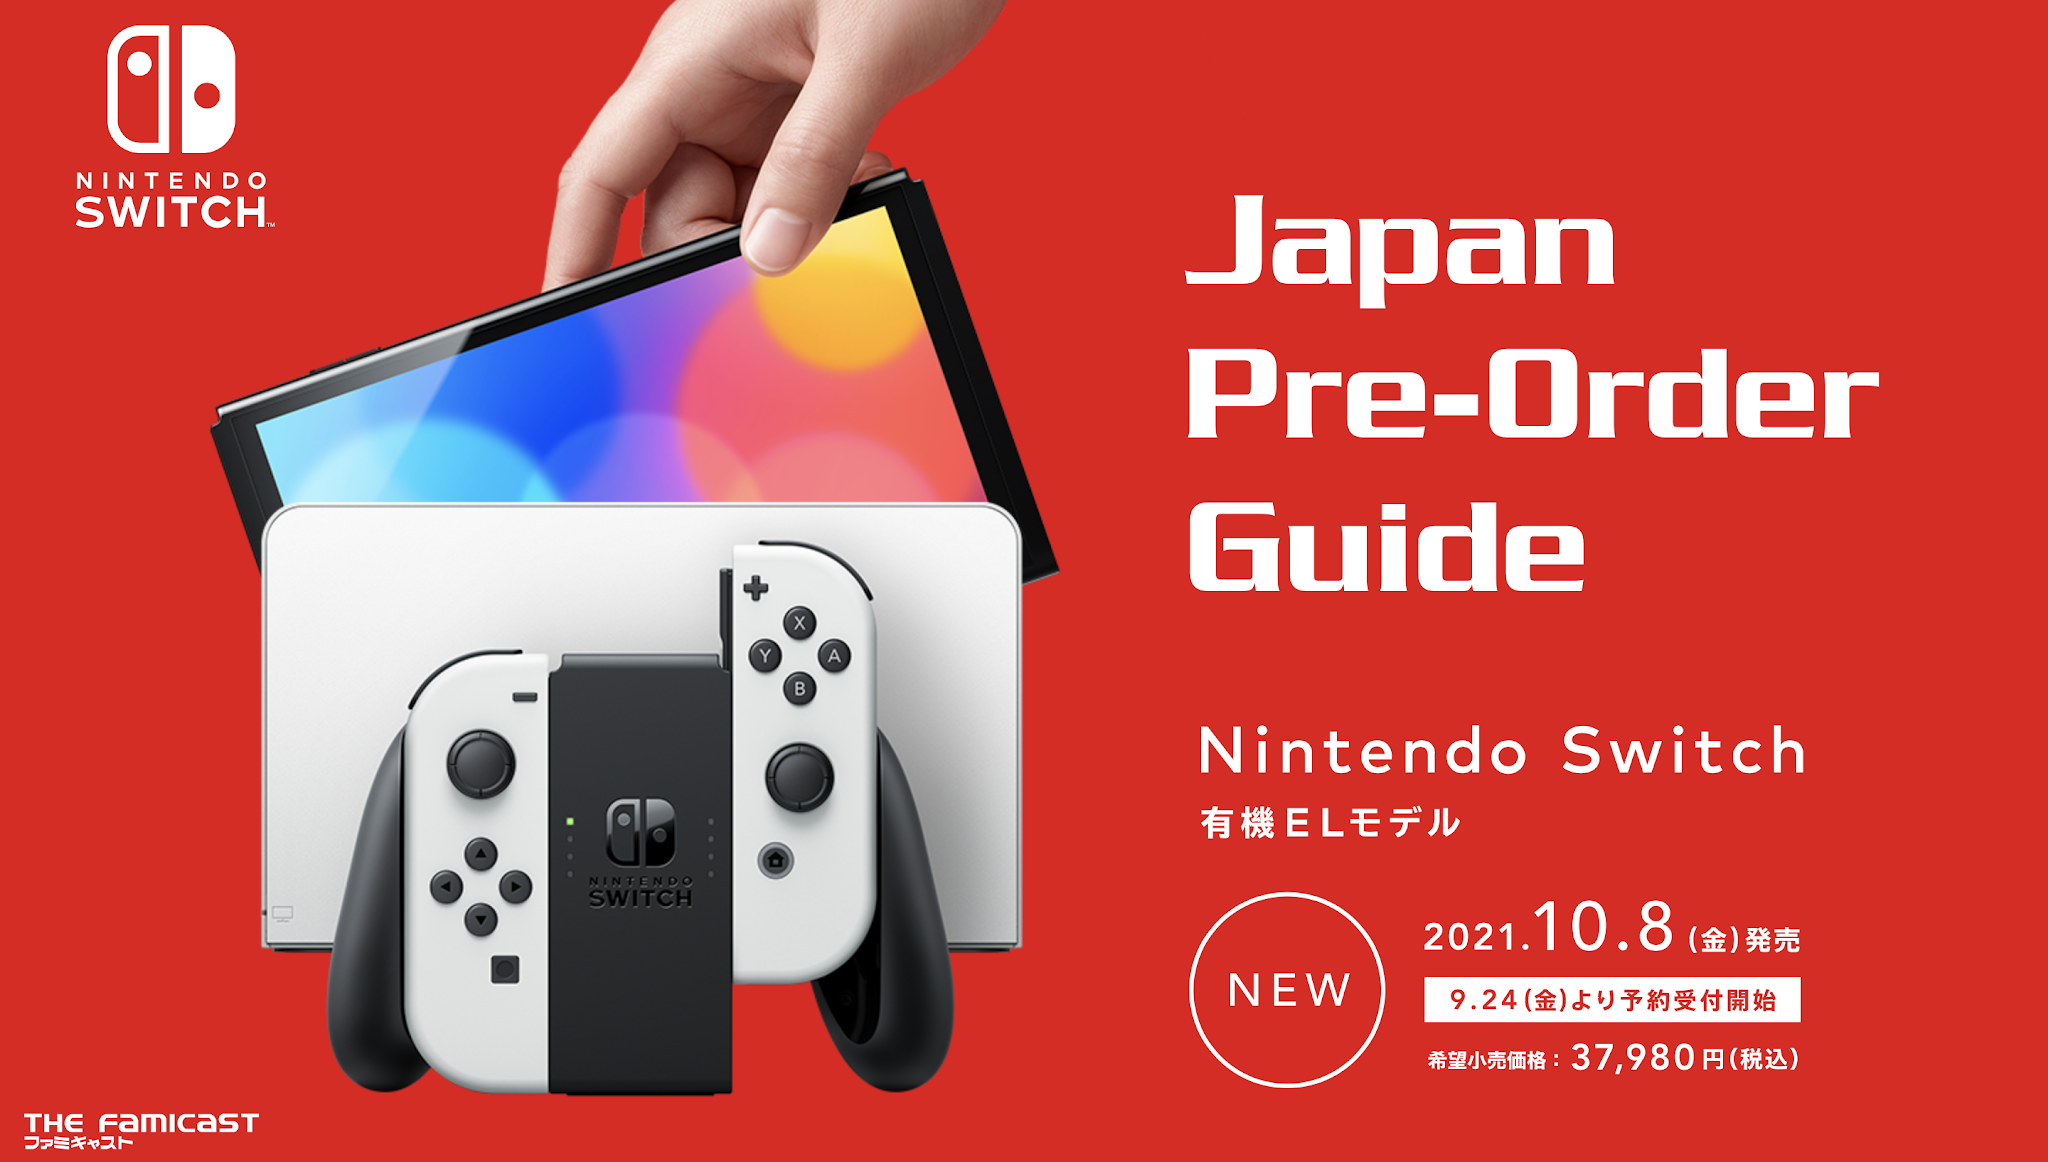 Nintendo Switch OLED Model Pre-Order Guide - TheFamicast.com: Japan-based Nintendo Podcasts, Videos & Reviews!